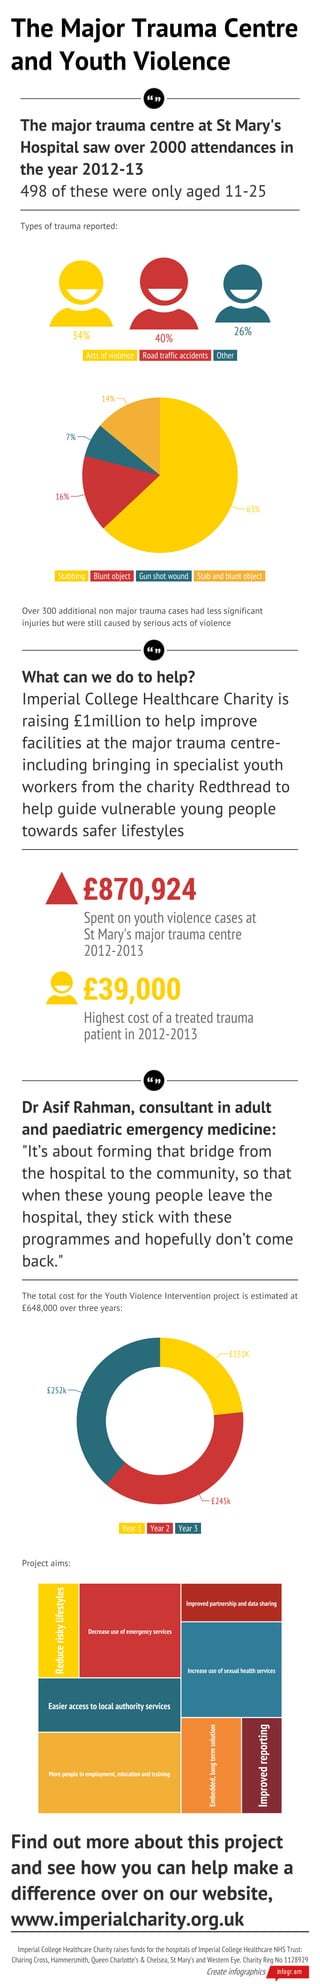 The Major Trauma Centre 
and Youth Violence 
The major trauma centre at St Mary's 
Hospital saw over 2000 attendances in 
the year 2012-13 
498 of these were only aged 11-25 
Types of trauma reported: 
34% 40% 26% 
Acts of violence Road traffic accidents Other 
63% 
7% 
16% 
14% 
Stabbing Blunt object Gun shot wound Stab and blunt object 
Over 300 additional non major trauma cases had less significant 
injuries but were still caused by serious acts of violence 
What can we do to help? 
Imperial College Healthcare Charity is 
raising £1million to help improve 
facilities at the major trauma centre-including 
bringing in specialist youth 
workers from the charity Redthread to 
help guide vulnerable young people 
towards safer lifestyles 
£870,924 
Spent on youth violence cases at 
St Mary's major trauma centre 
2012-2013 
£39,000 
Highest cost of a treated trauma 
patient in 2012-2013 
Dr Asif Rahman, consultant in adult 
and paediatric emergency medicine: 
"It’s about forming that bridge from 
the hospital to the community, so that 
when these young people leave the 
hospital, they stick with these 
programmes and hopefully don’t come 
back." 
The total cost for the Youth Violence Intervention project is estimated at 
£648,000 over three years: 
Year 1 Year 2 Year 3 
£151K 
£245k 
£252k 
Project aims: 
Reduce risky lifestyles 
Decrease use of emergency services 
Easier access to local authority services 
More people in employment, education and training 
Improved partnership and data sharing 
Increase use of sexual health services 
Embedded, long term solution 
Improved reporting 
Find out more about this project 
and see how you can help make a 
difference over on our website, 
www.imperialcharity.org.uk 
Imperial College Healthcare Charity raises funds for the hospitals of Imperial College Healthcare NHS Trust: 
Charing Cross, Hammersmith, Queen Charlotte’s & Chelsea, St Mary’s and Western Eye. Charity Reg No 1128929 
Create infographics 
